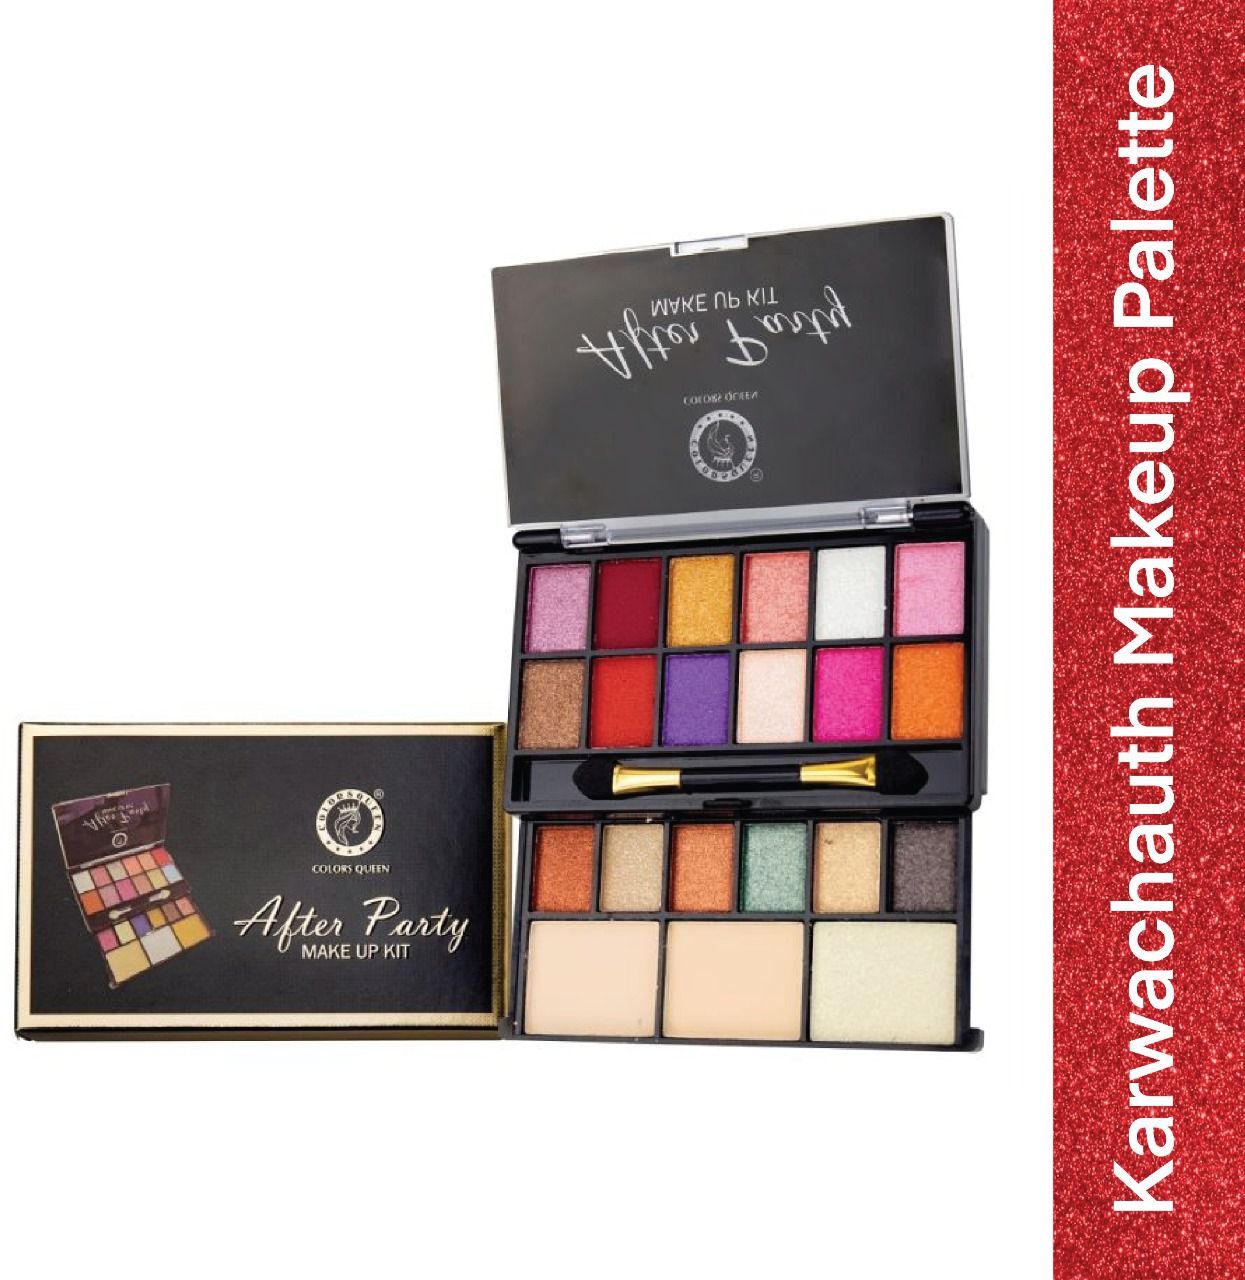     			Colors Queen After Party Make Up Kit Face 70